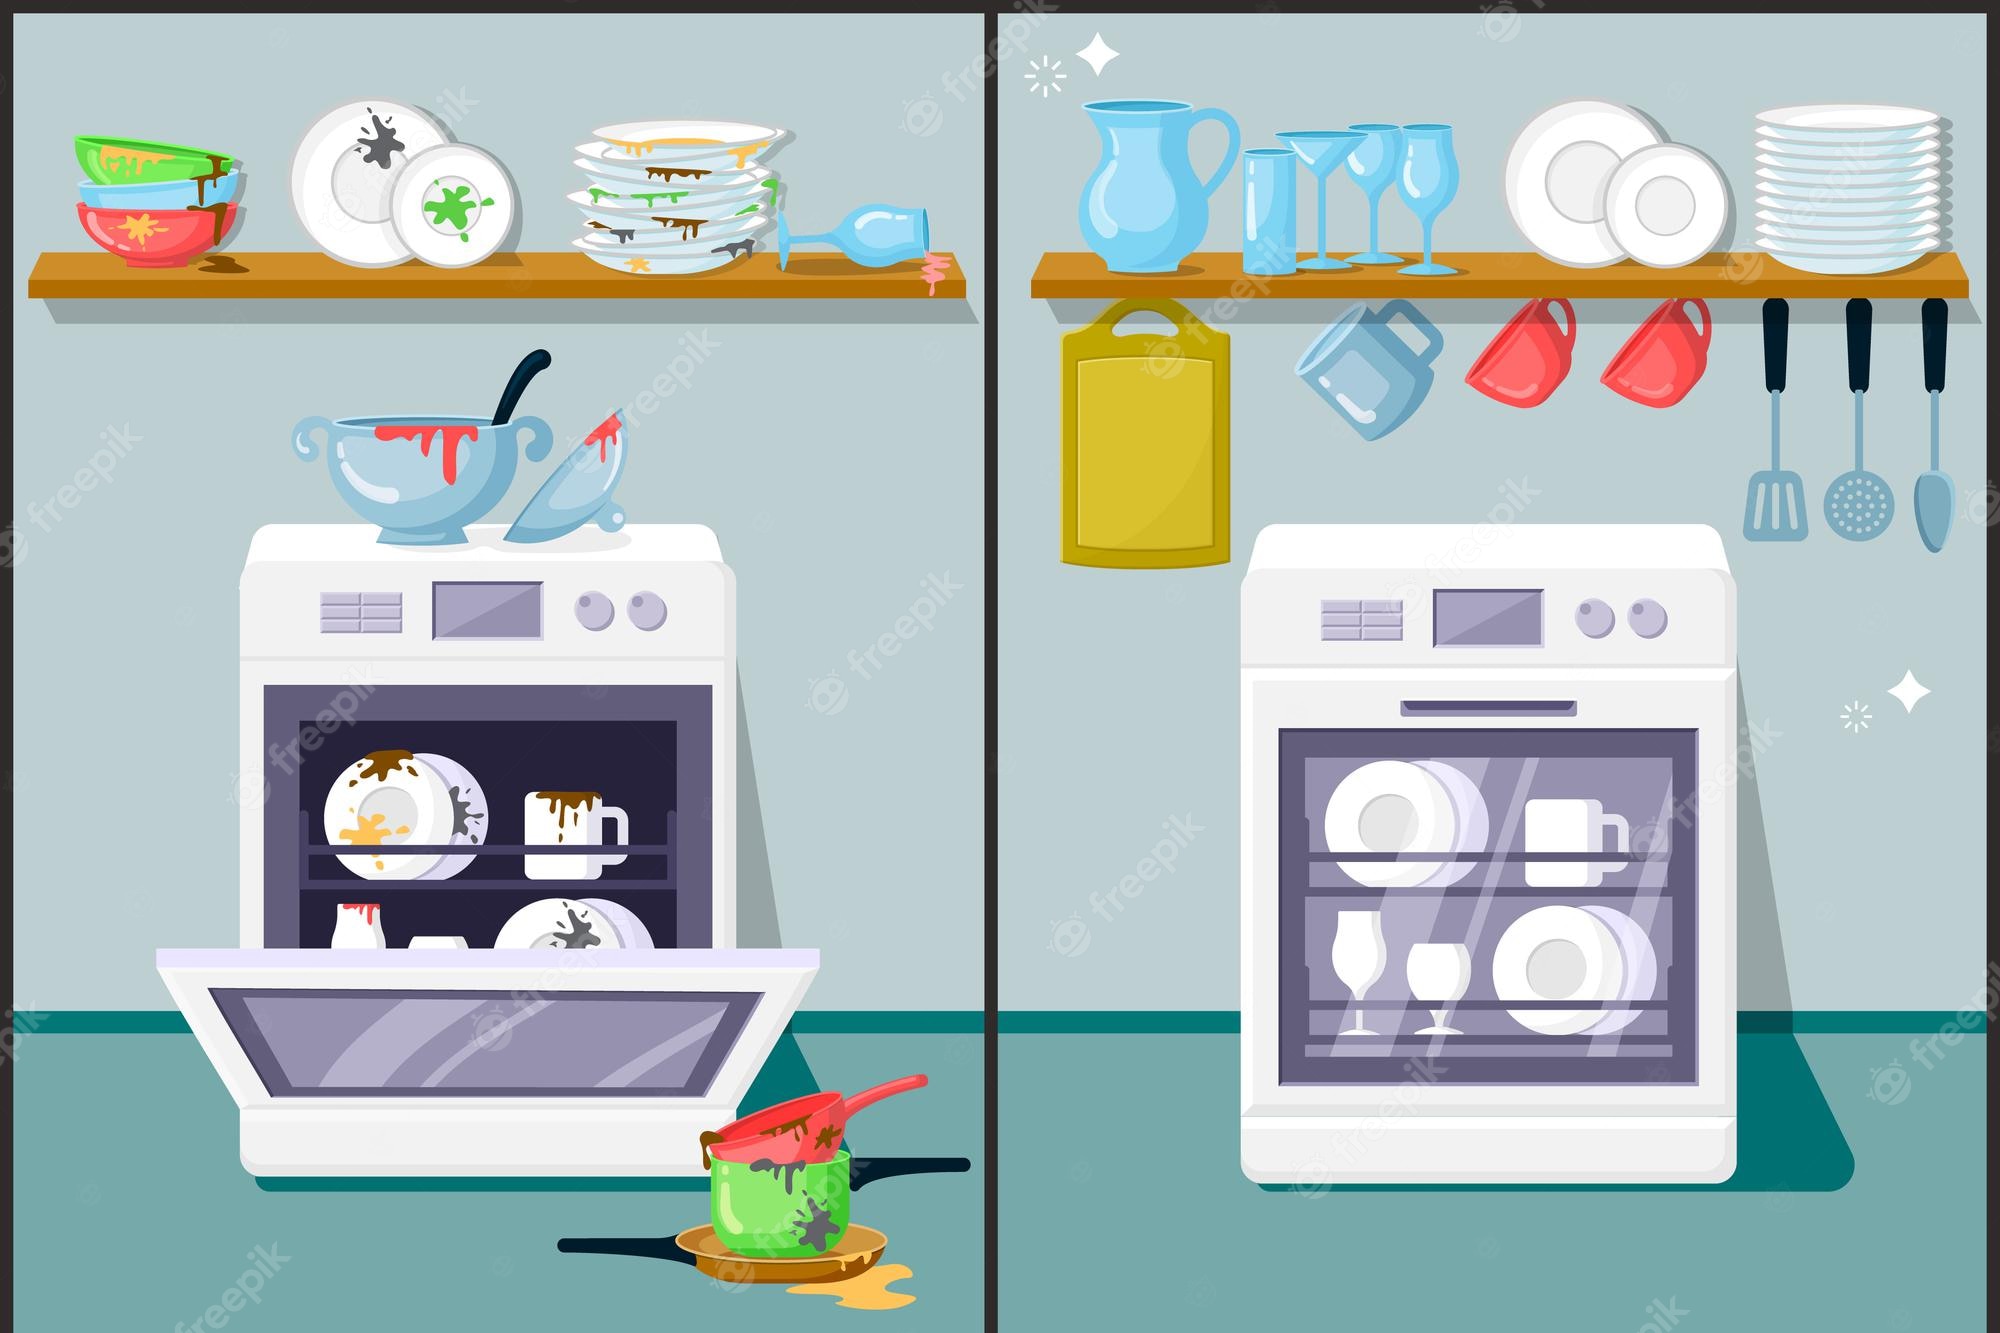 clean dirty dishes clipart - Clip Art Library - Clip Art Library